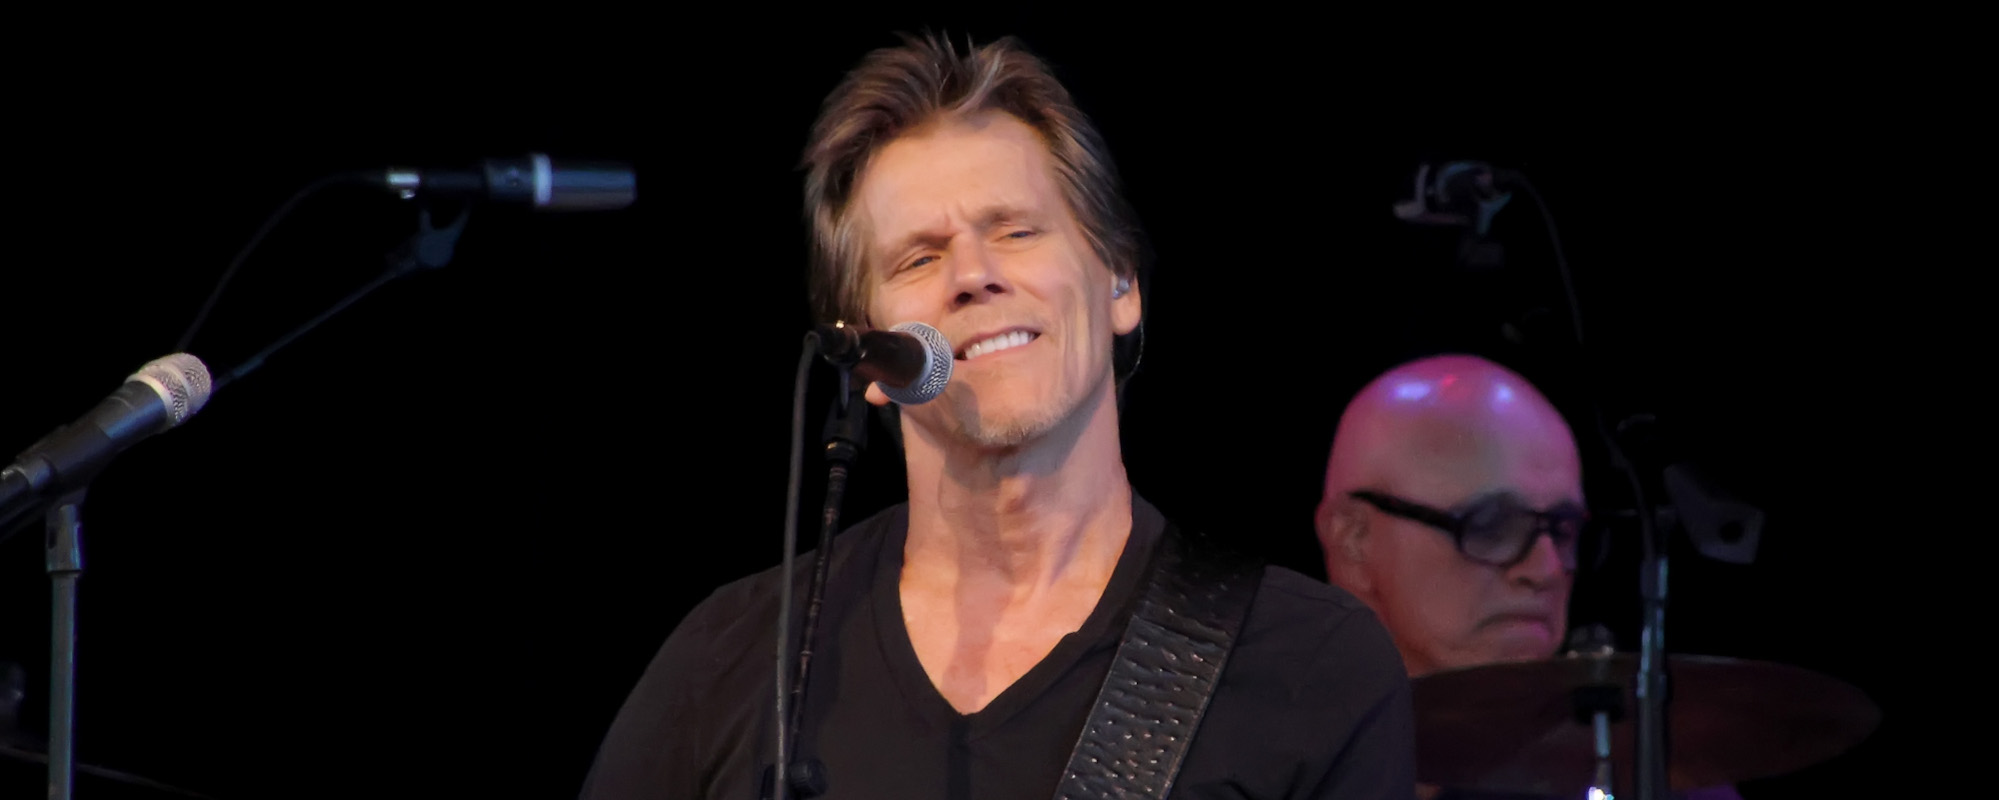 Watch: Kevin Bacon Covers Beyoncé’s “Heated” For An Audience of Goats